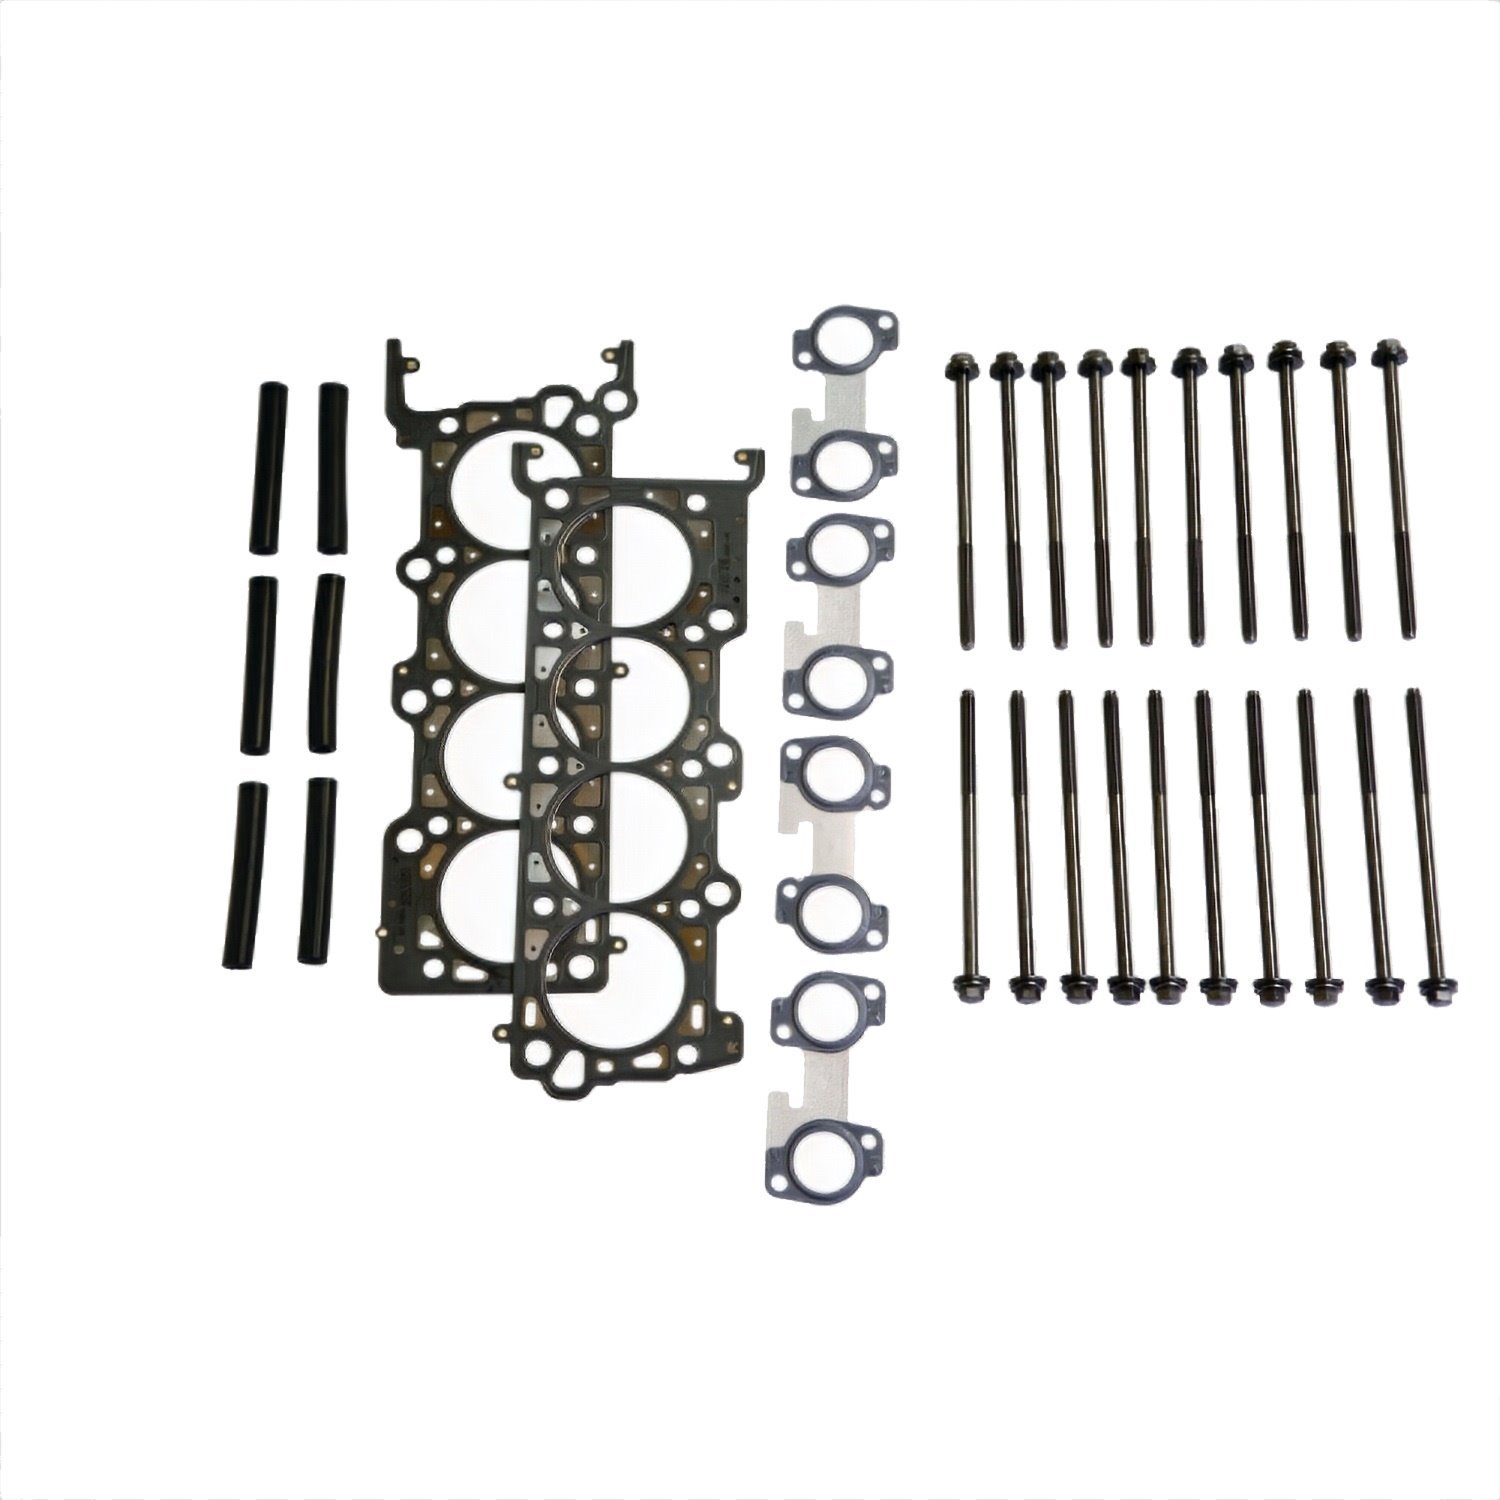 Cylinder Head Changing Kit 1996-04 Mustang 4.6L SOHC (except Supercharged)